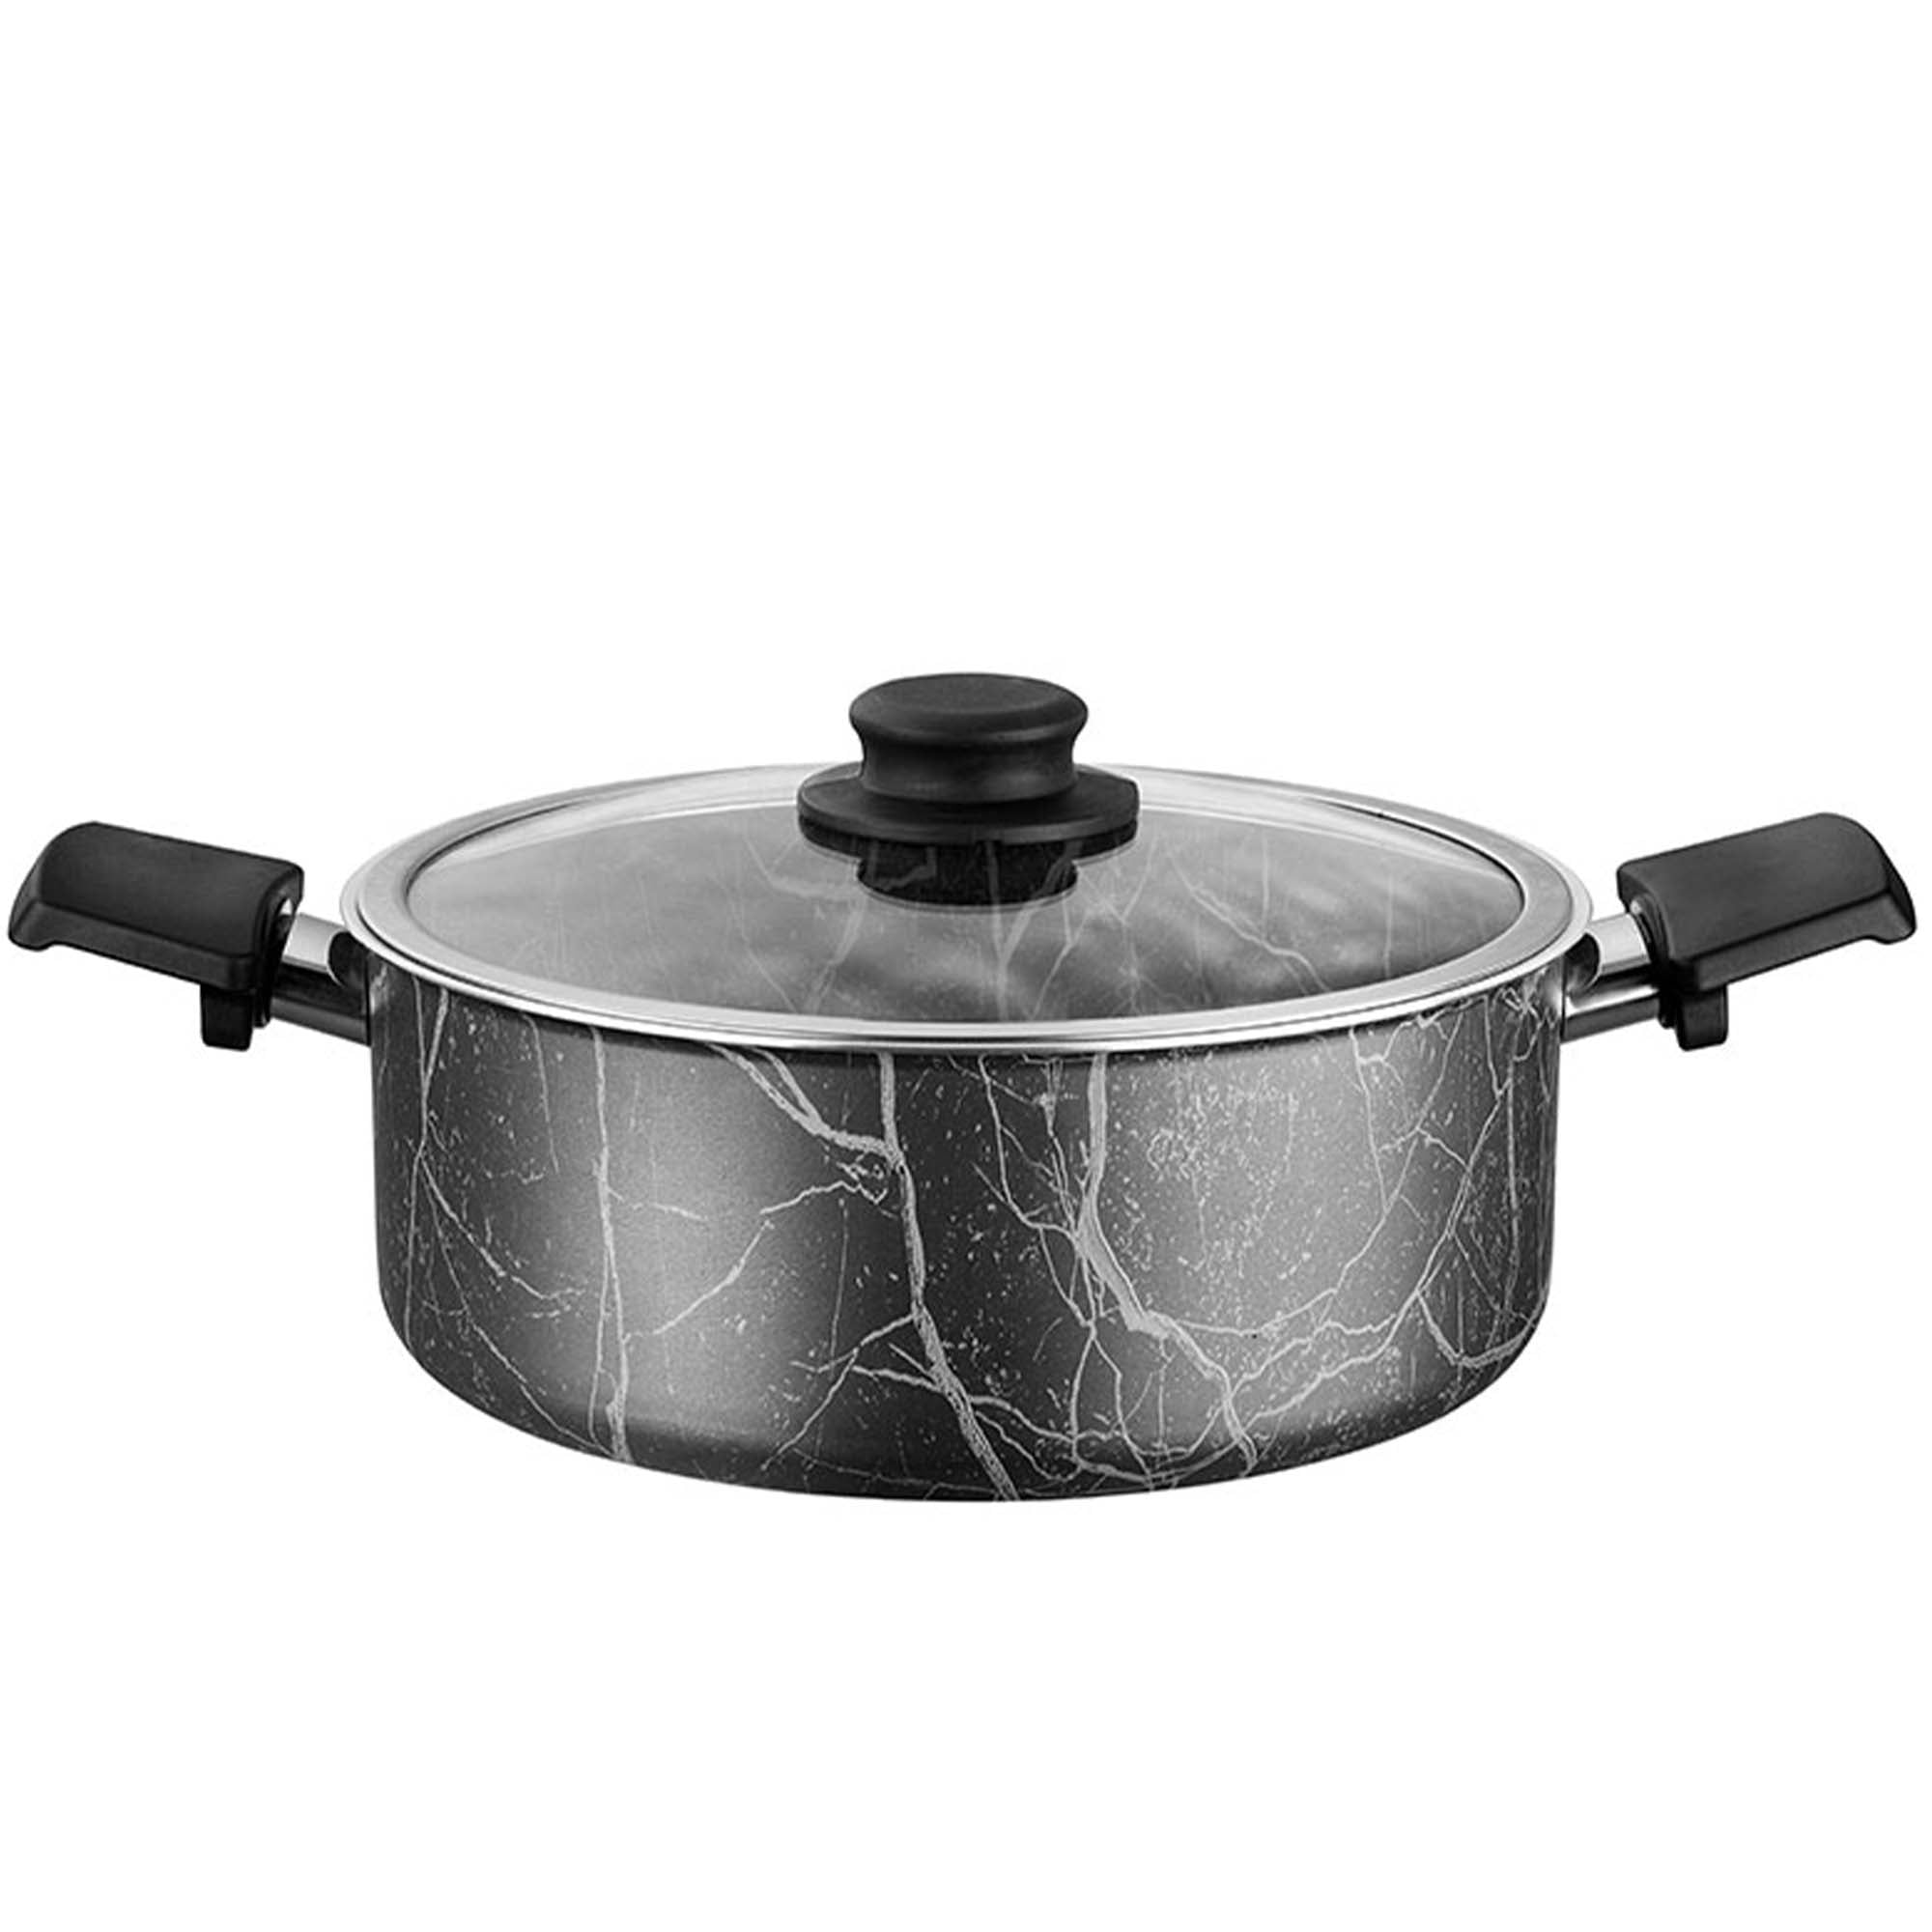 24cm Non Stick Stockpot Casserole Cooking Pan Induction Base Marble Effect Black 